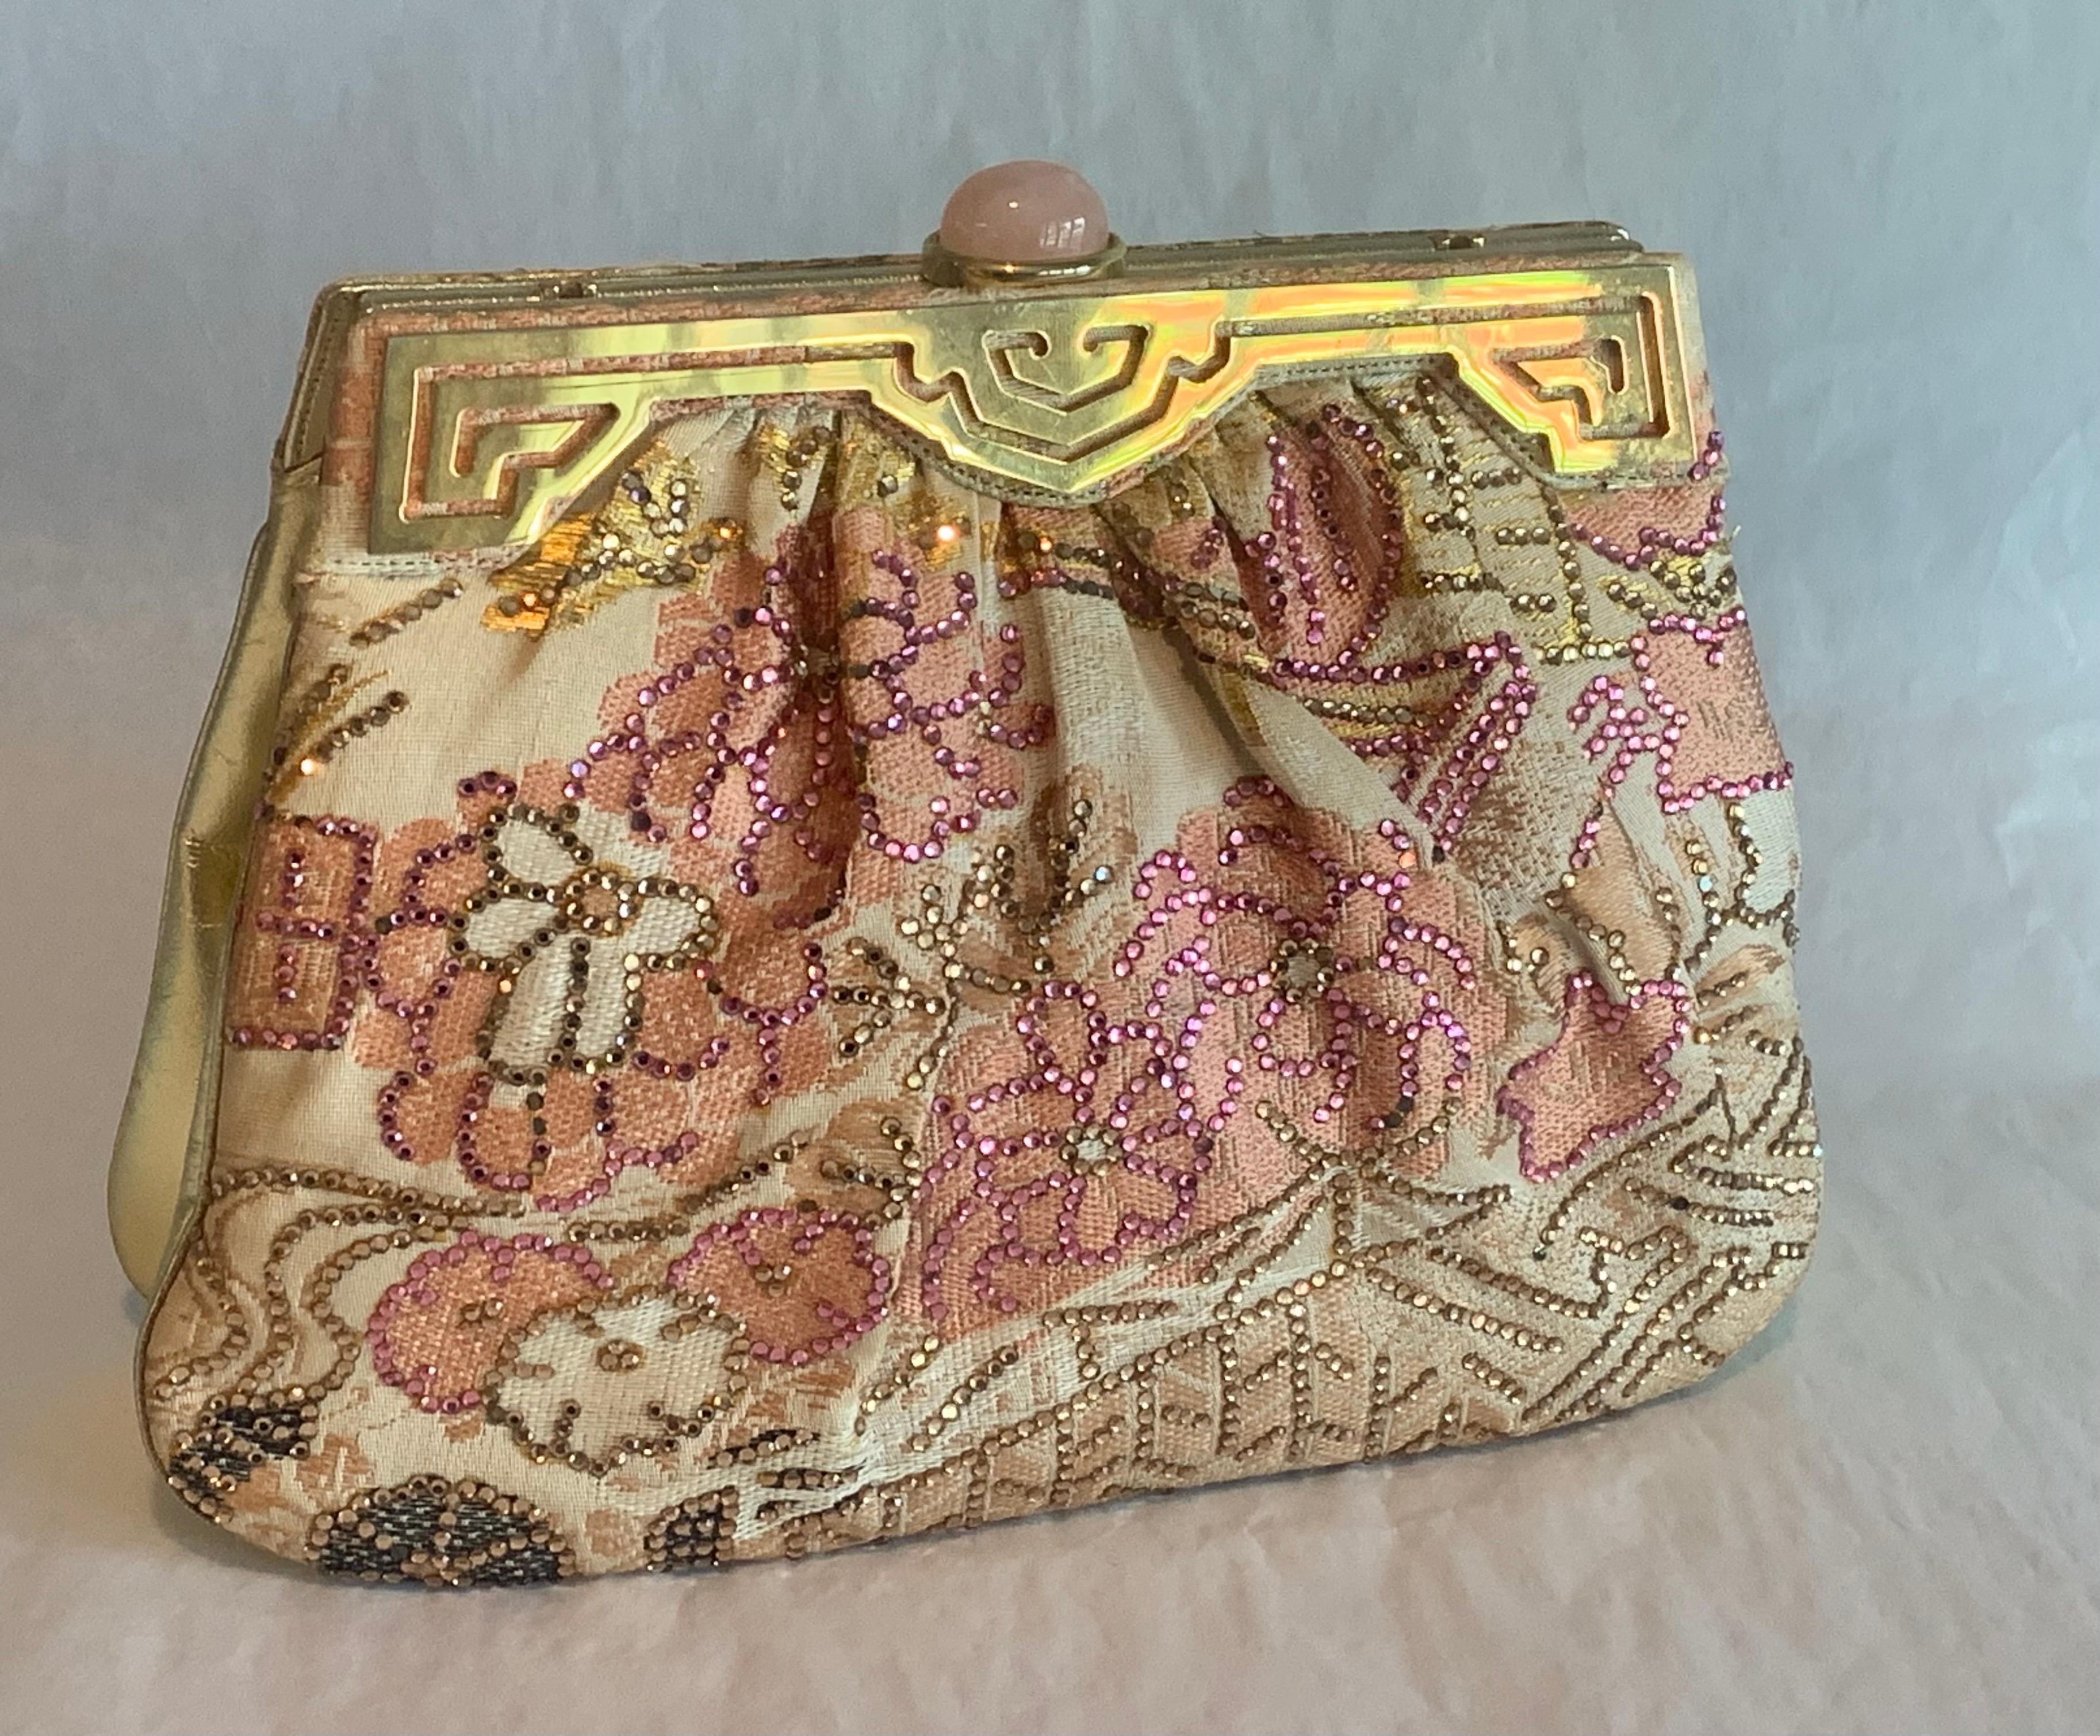 Judith Lieber has outlined the floral patten in this woven silk bag with coordinating beads in pink, gold and green. There is a gold toned frame on the front with a large pink stone as the clasp, and there is a double chain strap tucked inside. The